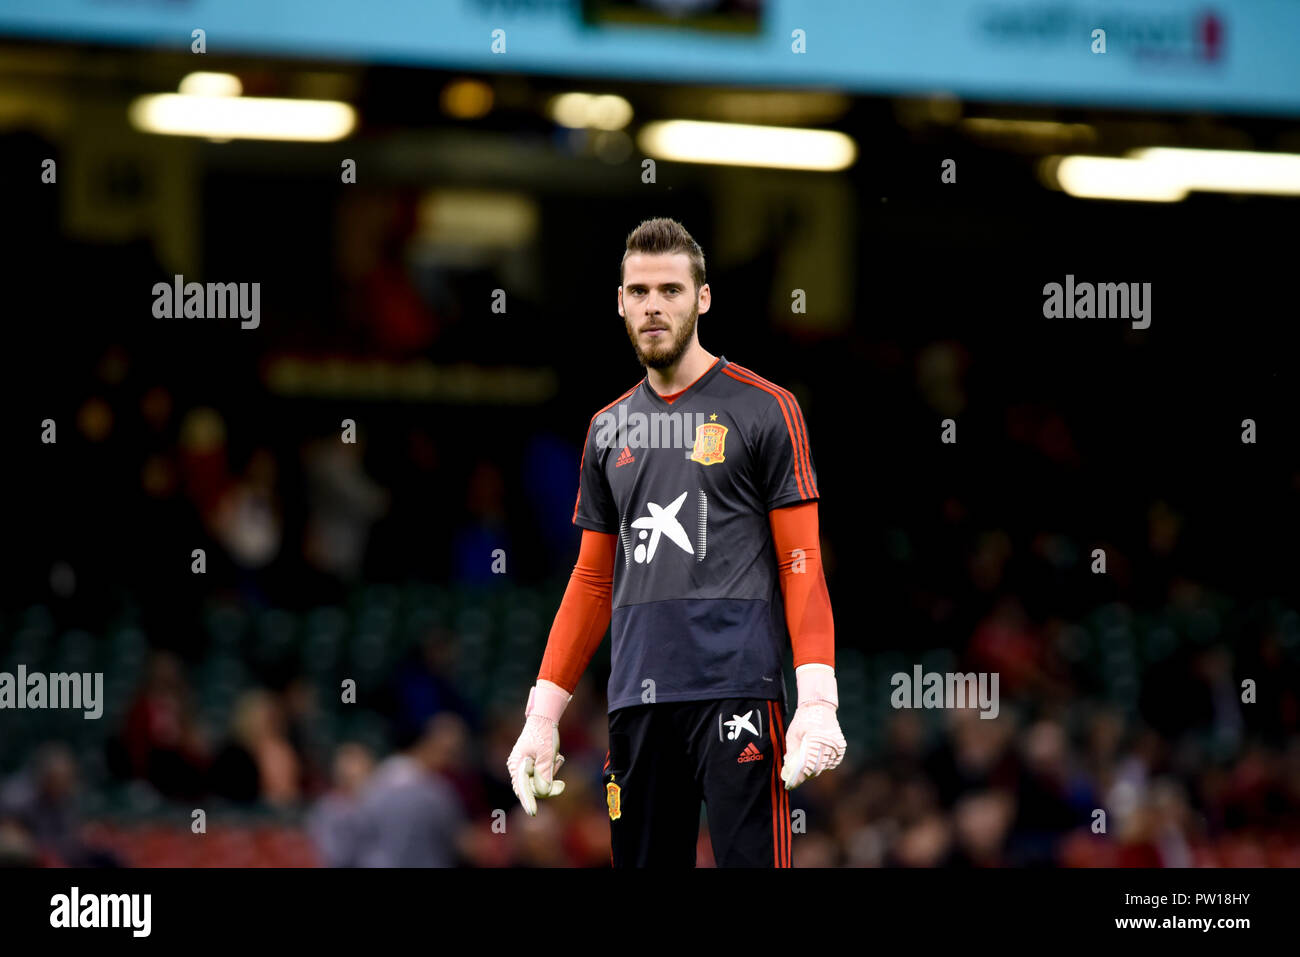 Cardiff, UK. 11th Oct 2018. Wales v Spain, International Football Friendly, National Stadium of Wales, 11/10/18: Spain's goalkeeper David De Gea Credit: Andrew Dowling/Influential Photography/Alamy Live News Stock Photo